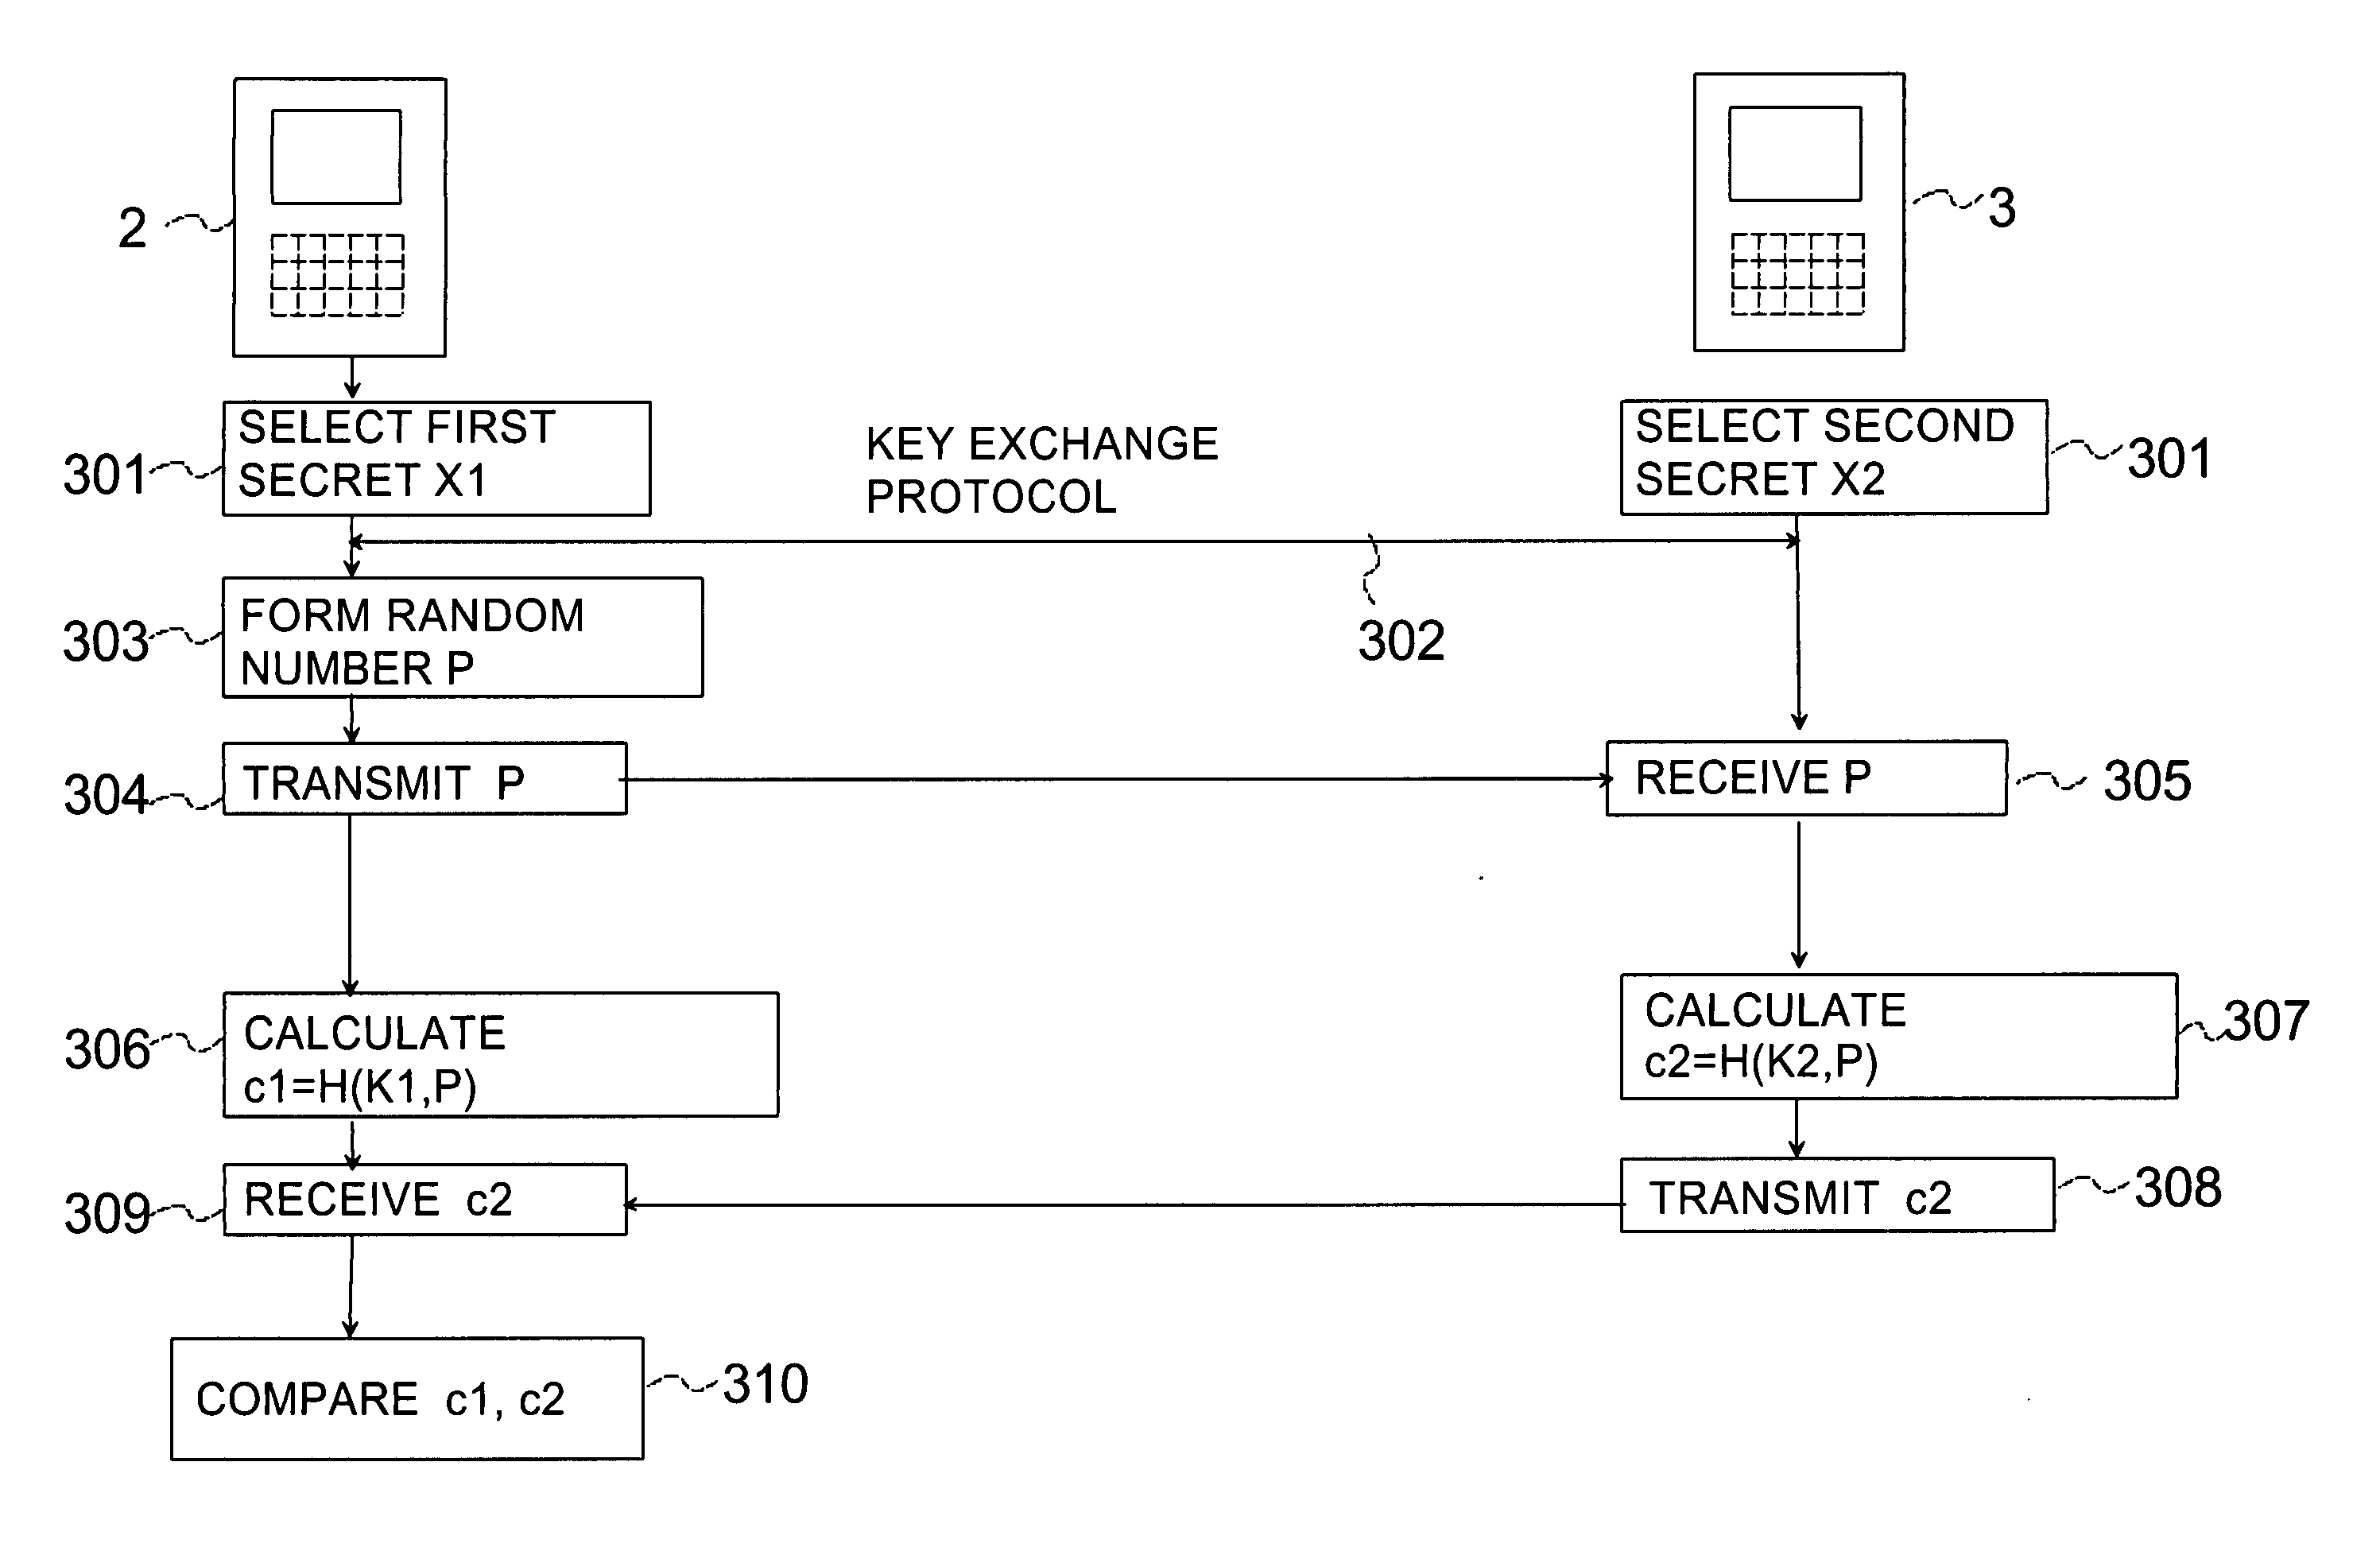 Setting up a short-range wireless data transmission connection between devices